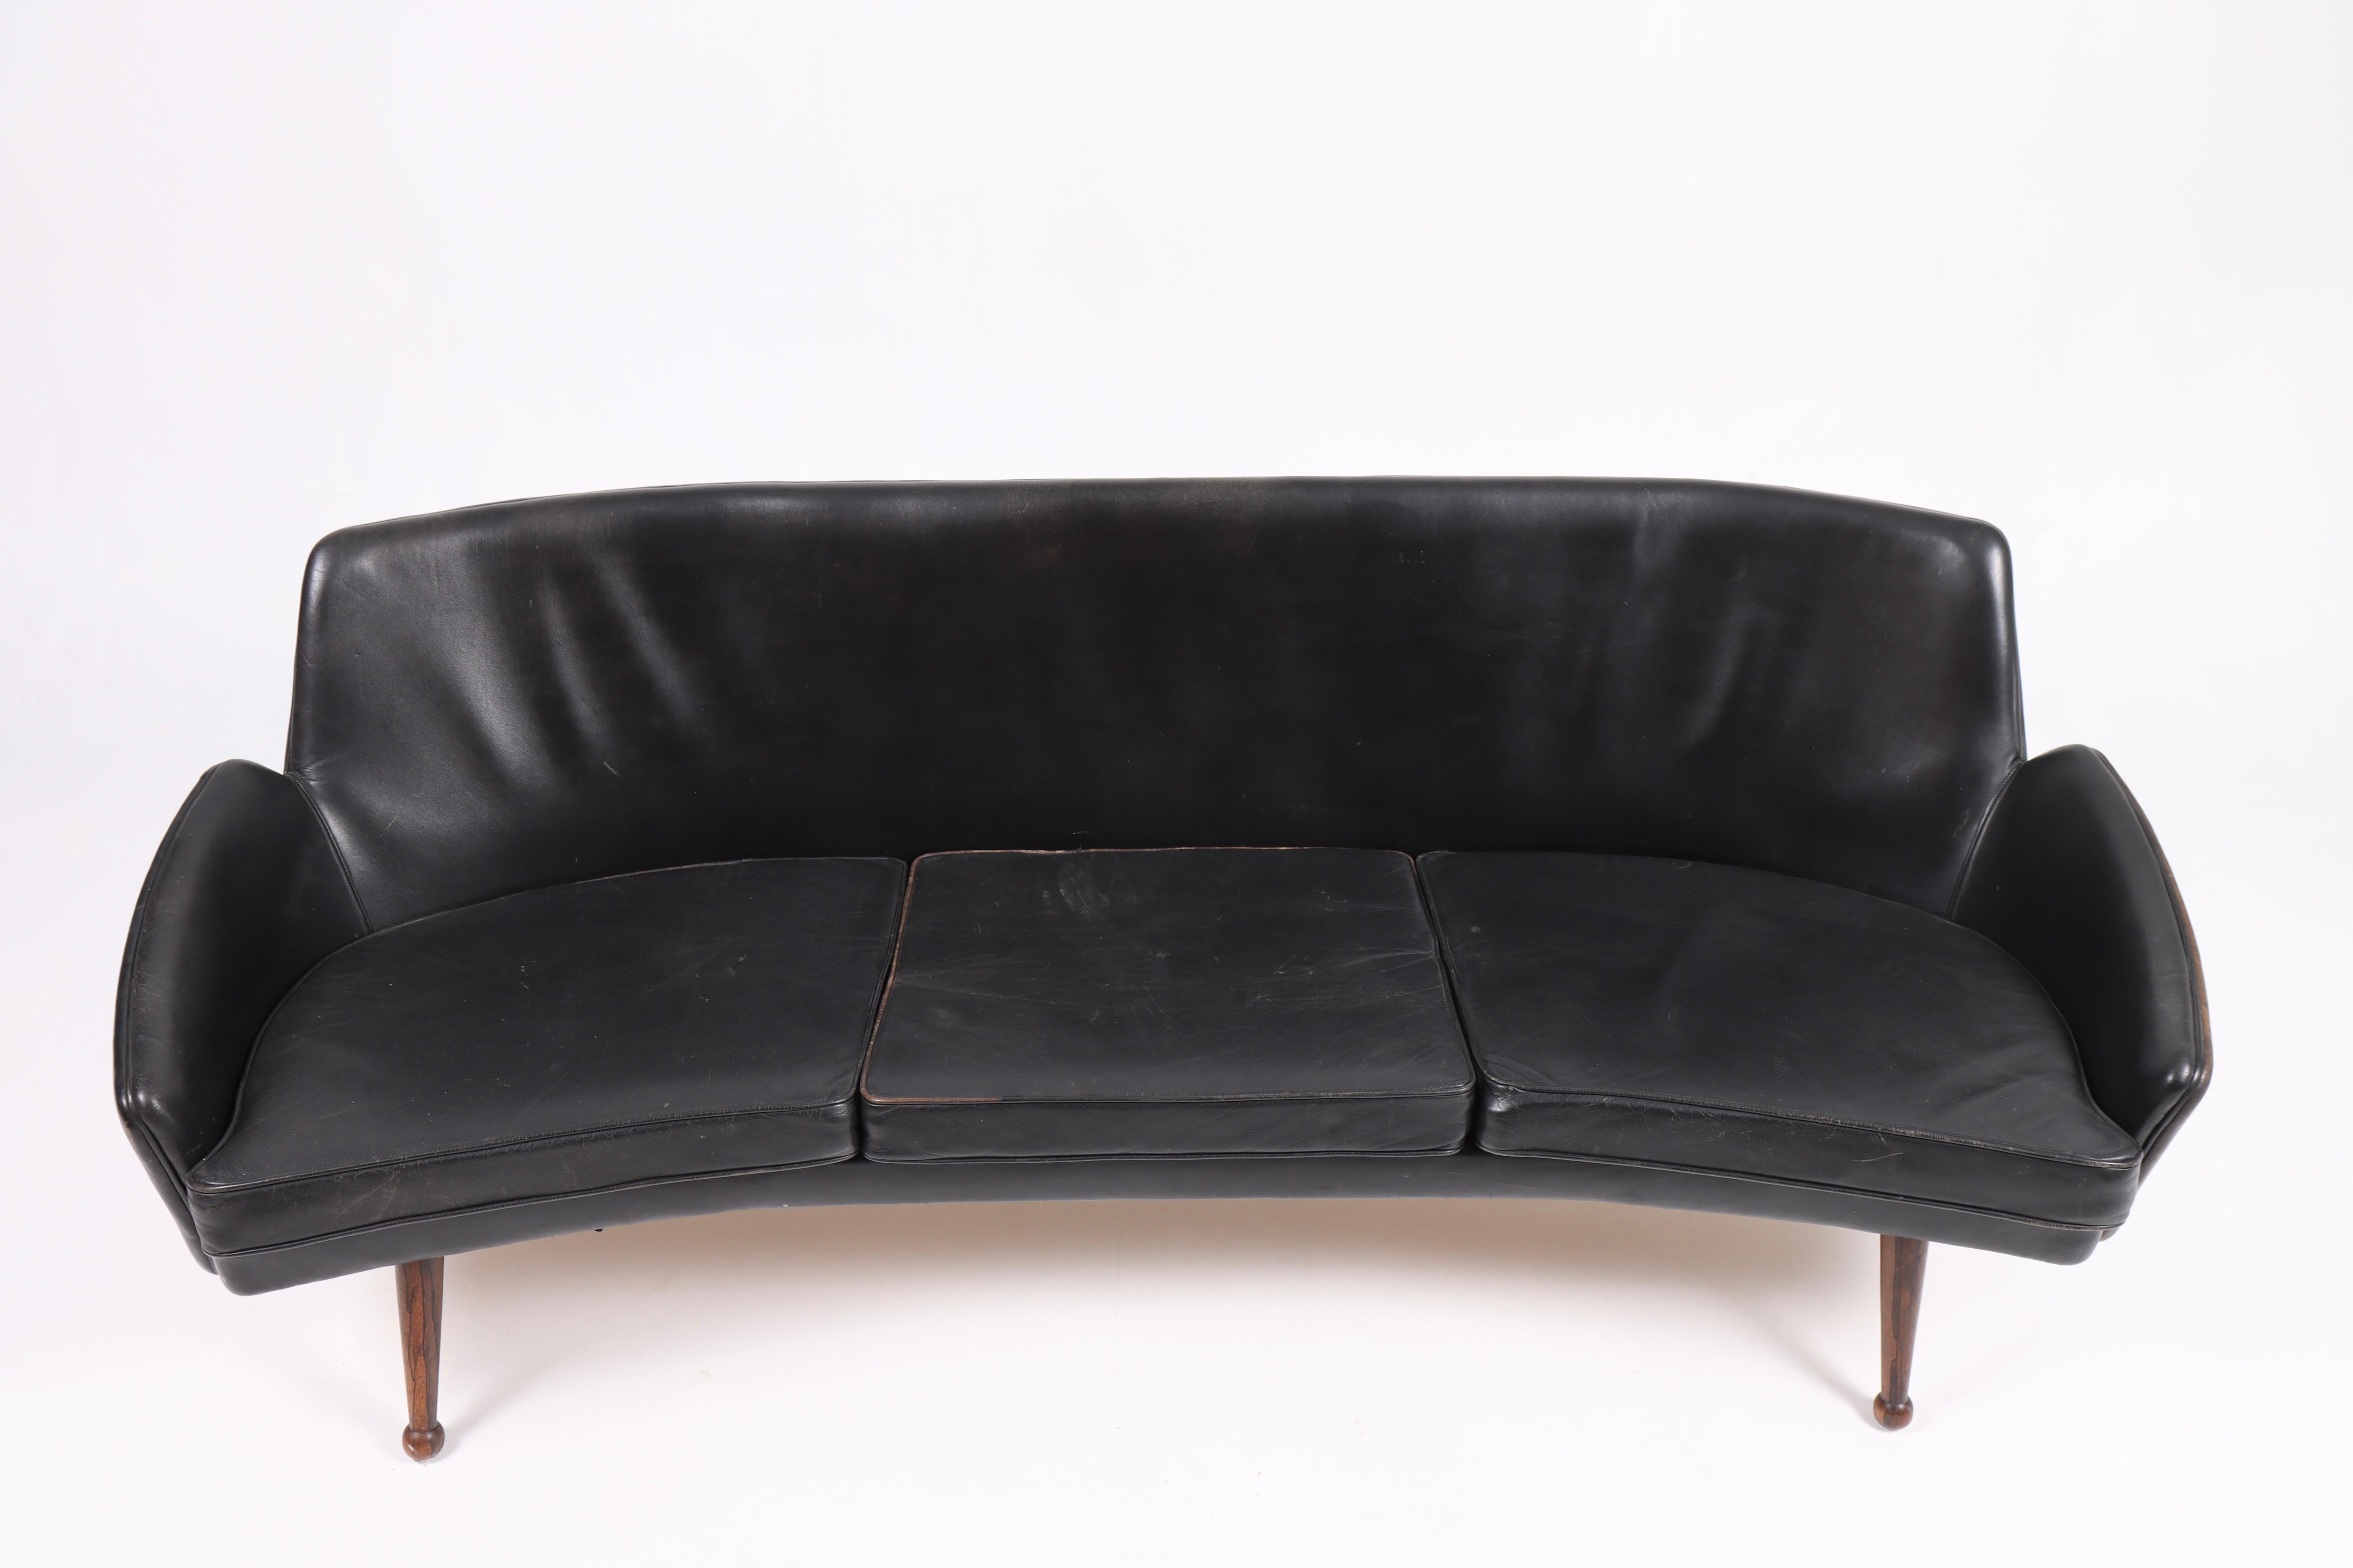 Midcentury Sofa in Patinated Leather, Danish Design 1950s In Good Condition For Sale In Lejre, DK